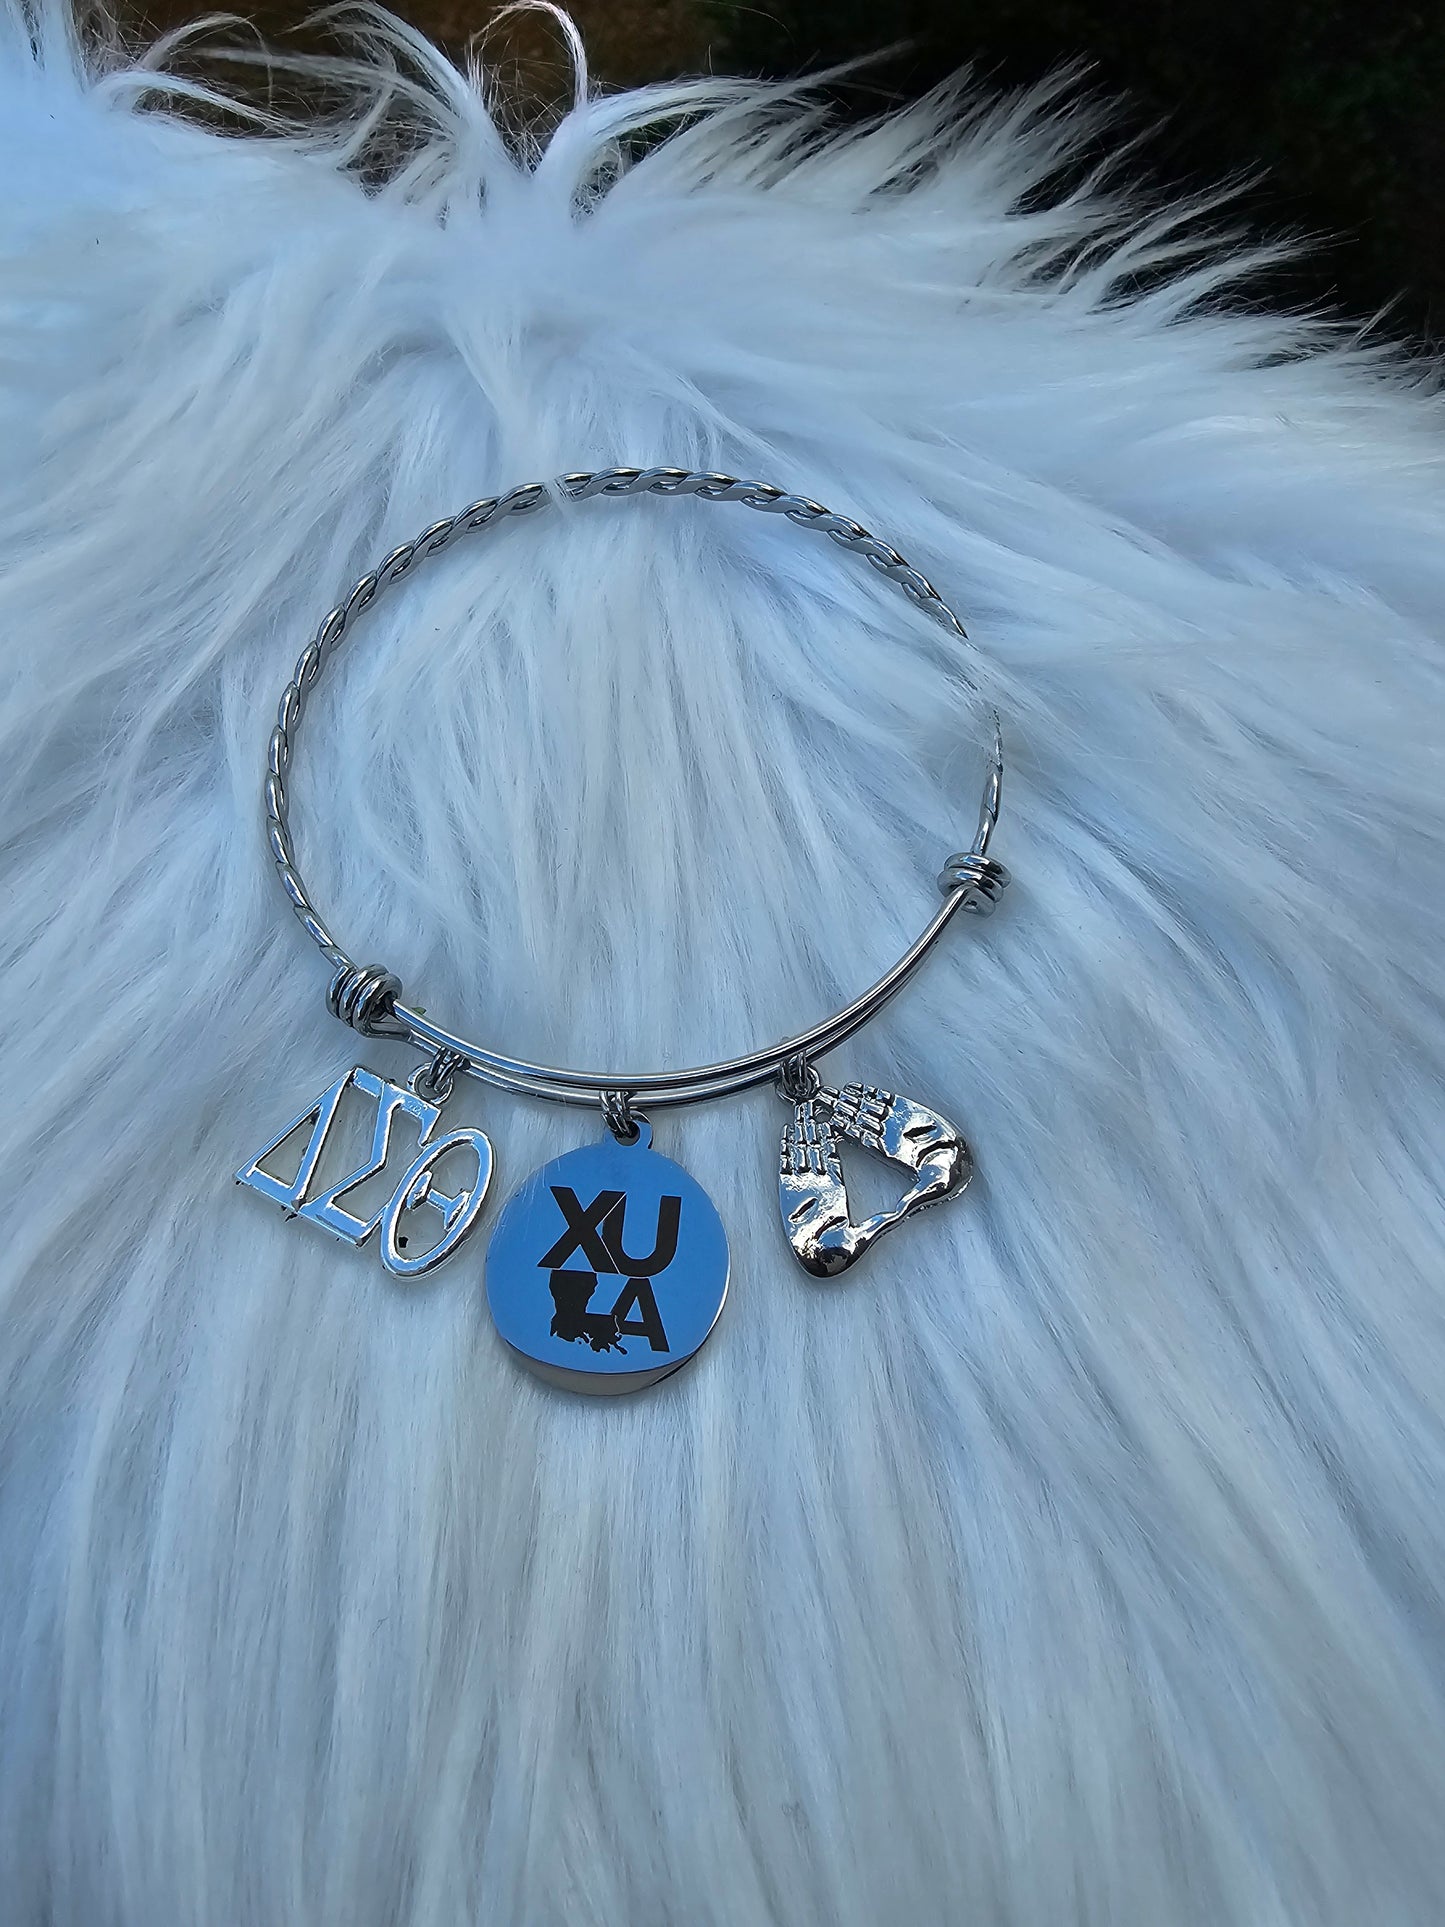 Xavier University of Louisiana Bracelet Available In Gold and Silver